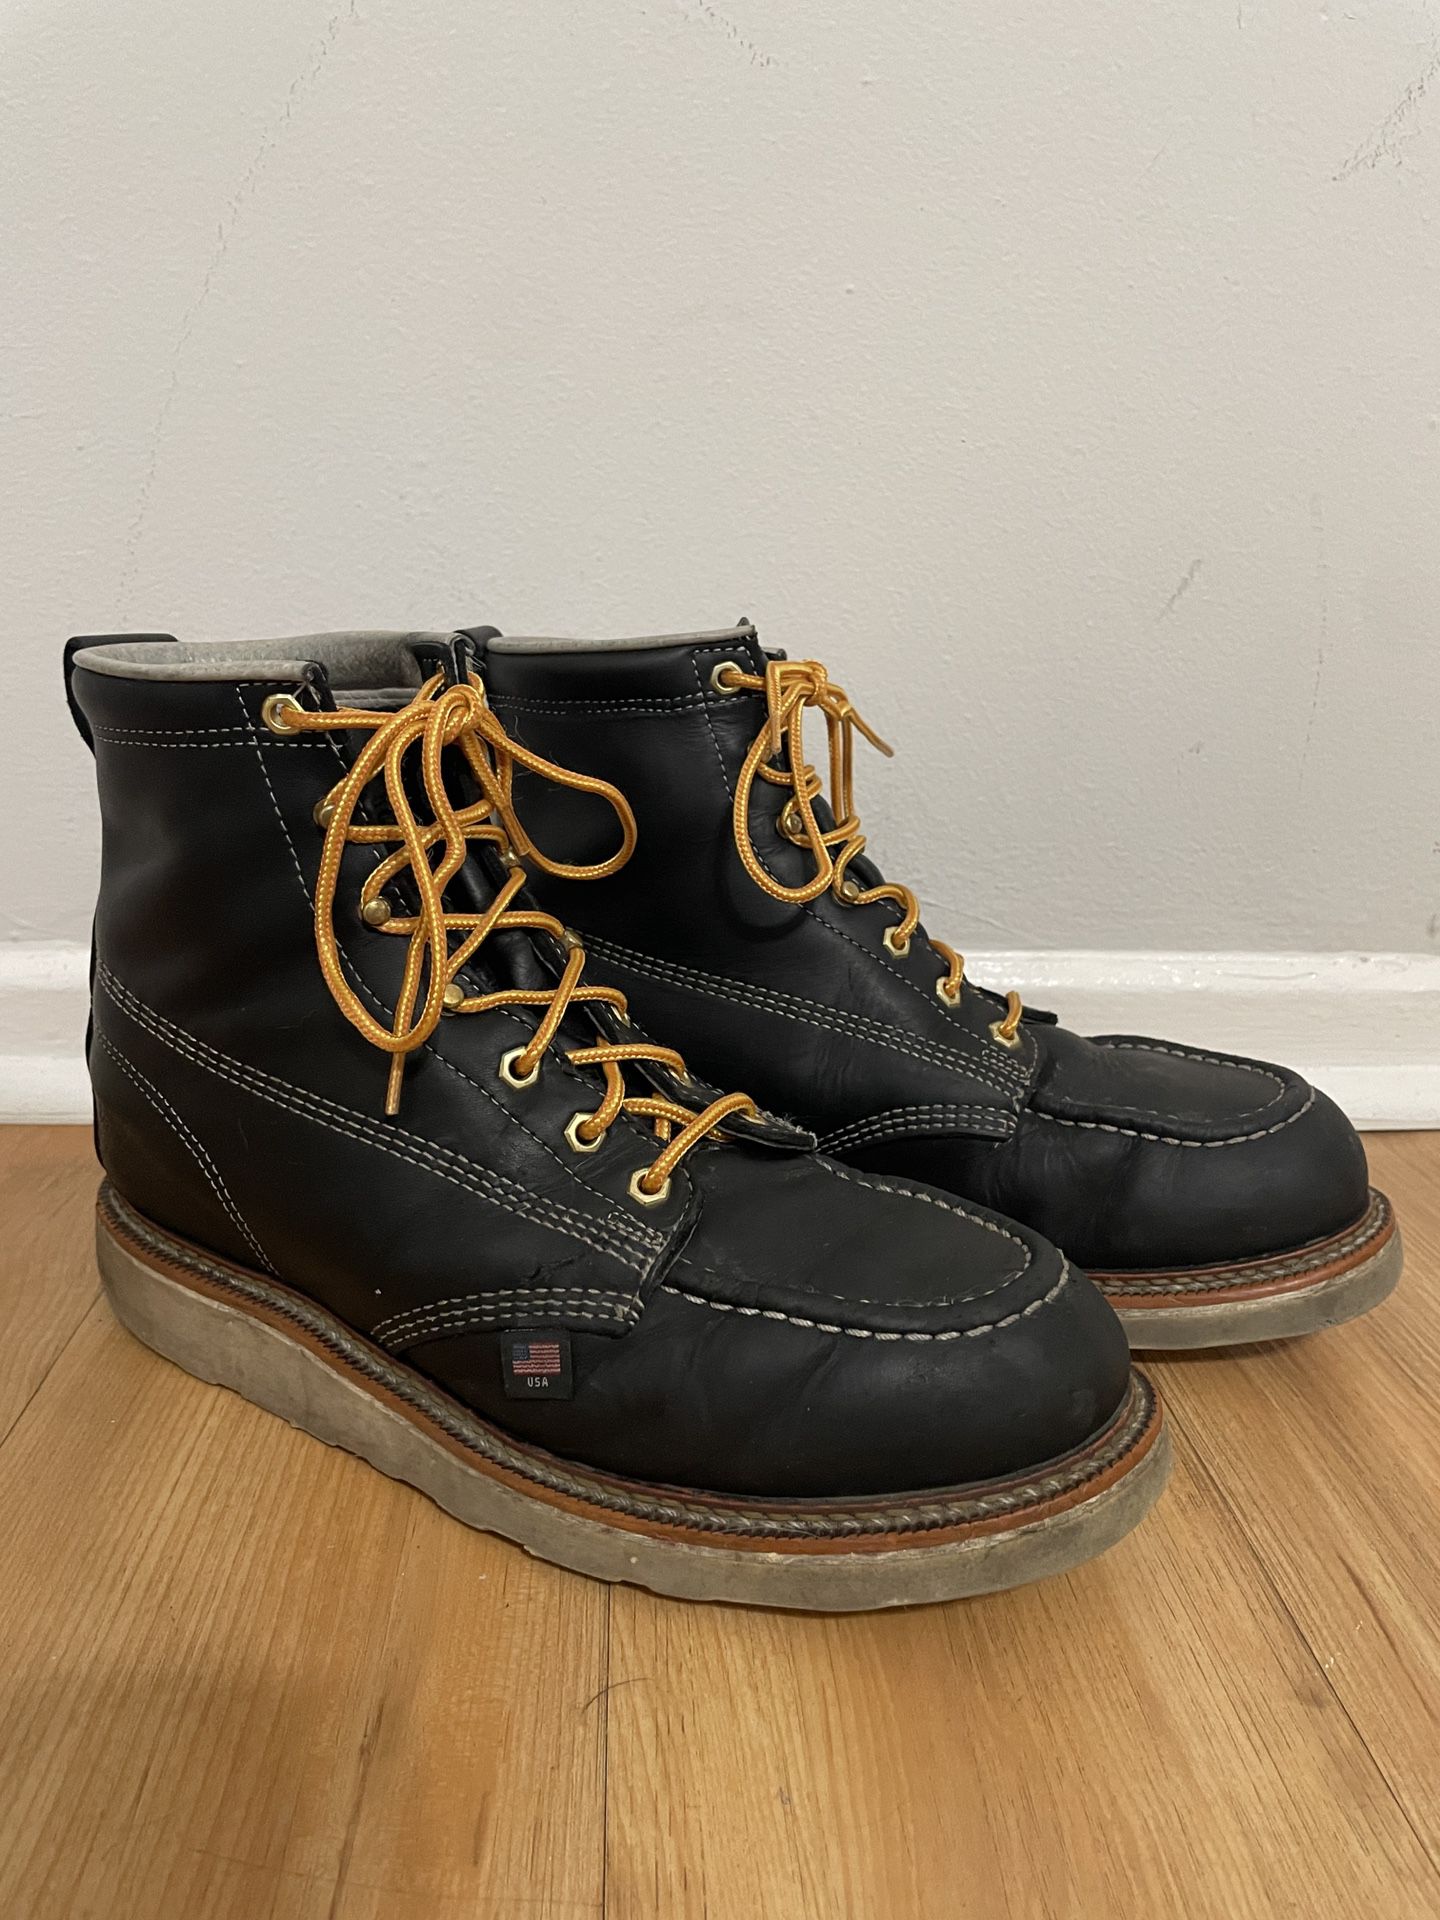 Men's Thorogood 6" Work Boots (U.S.A.) (contact info removed)